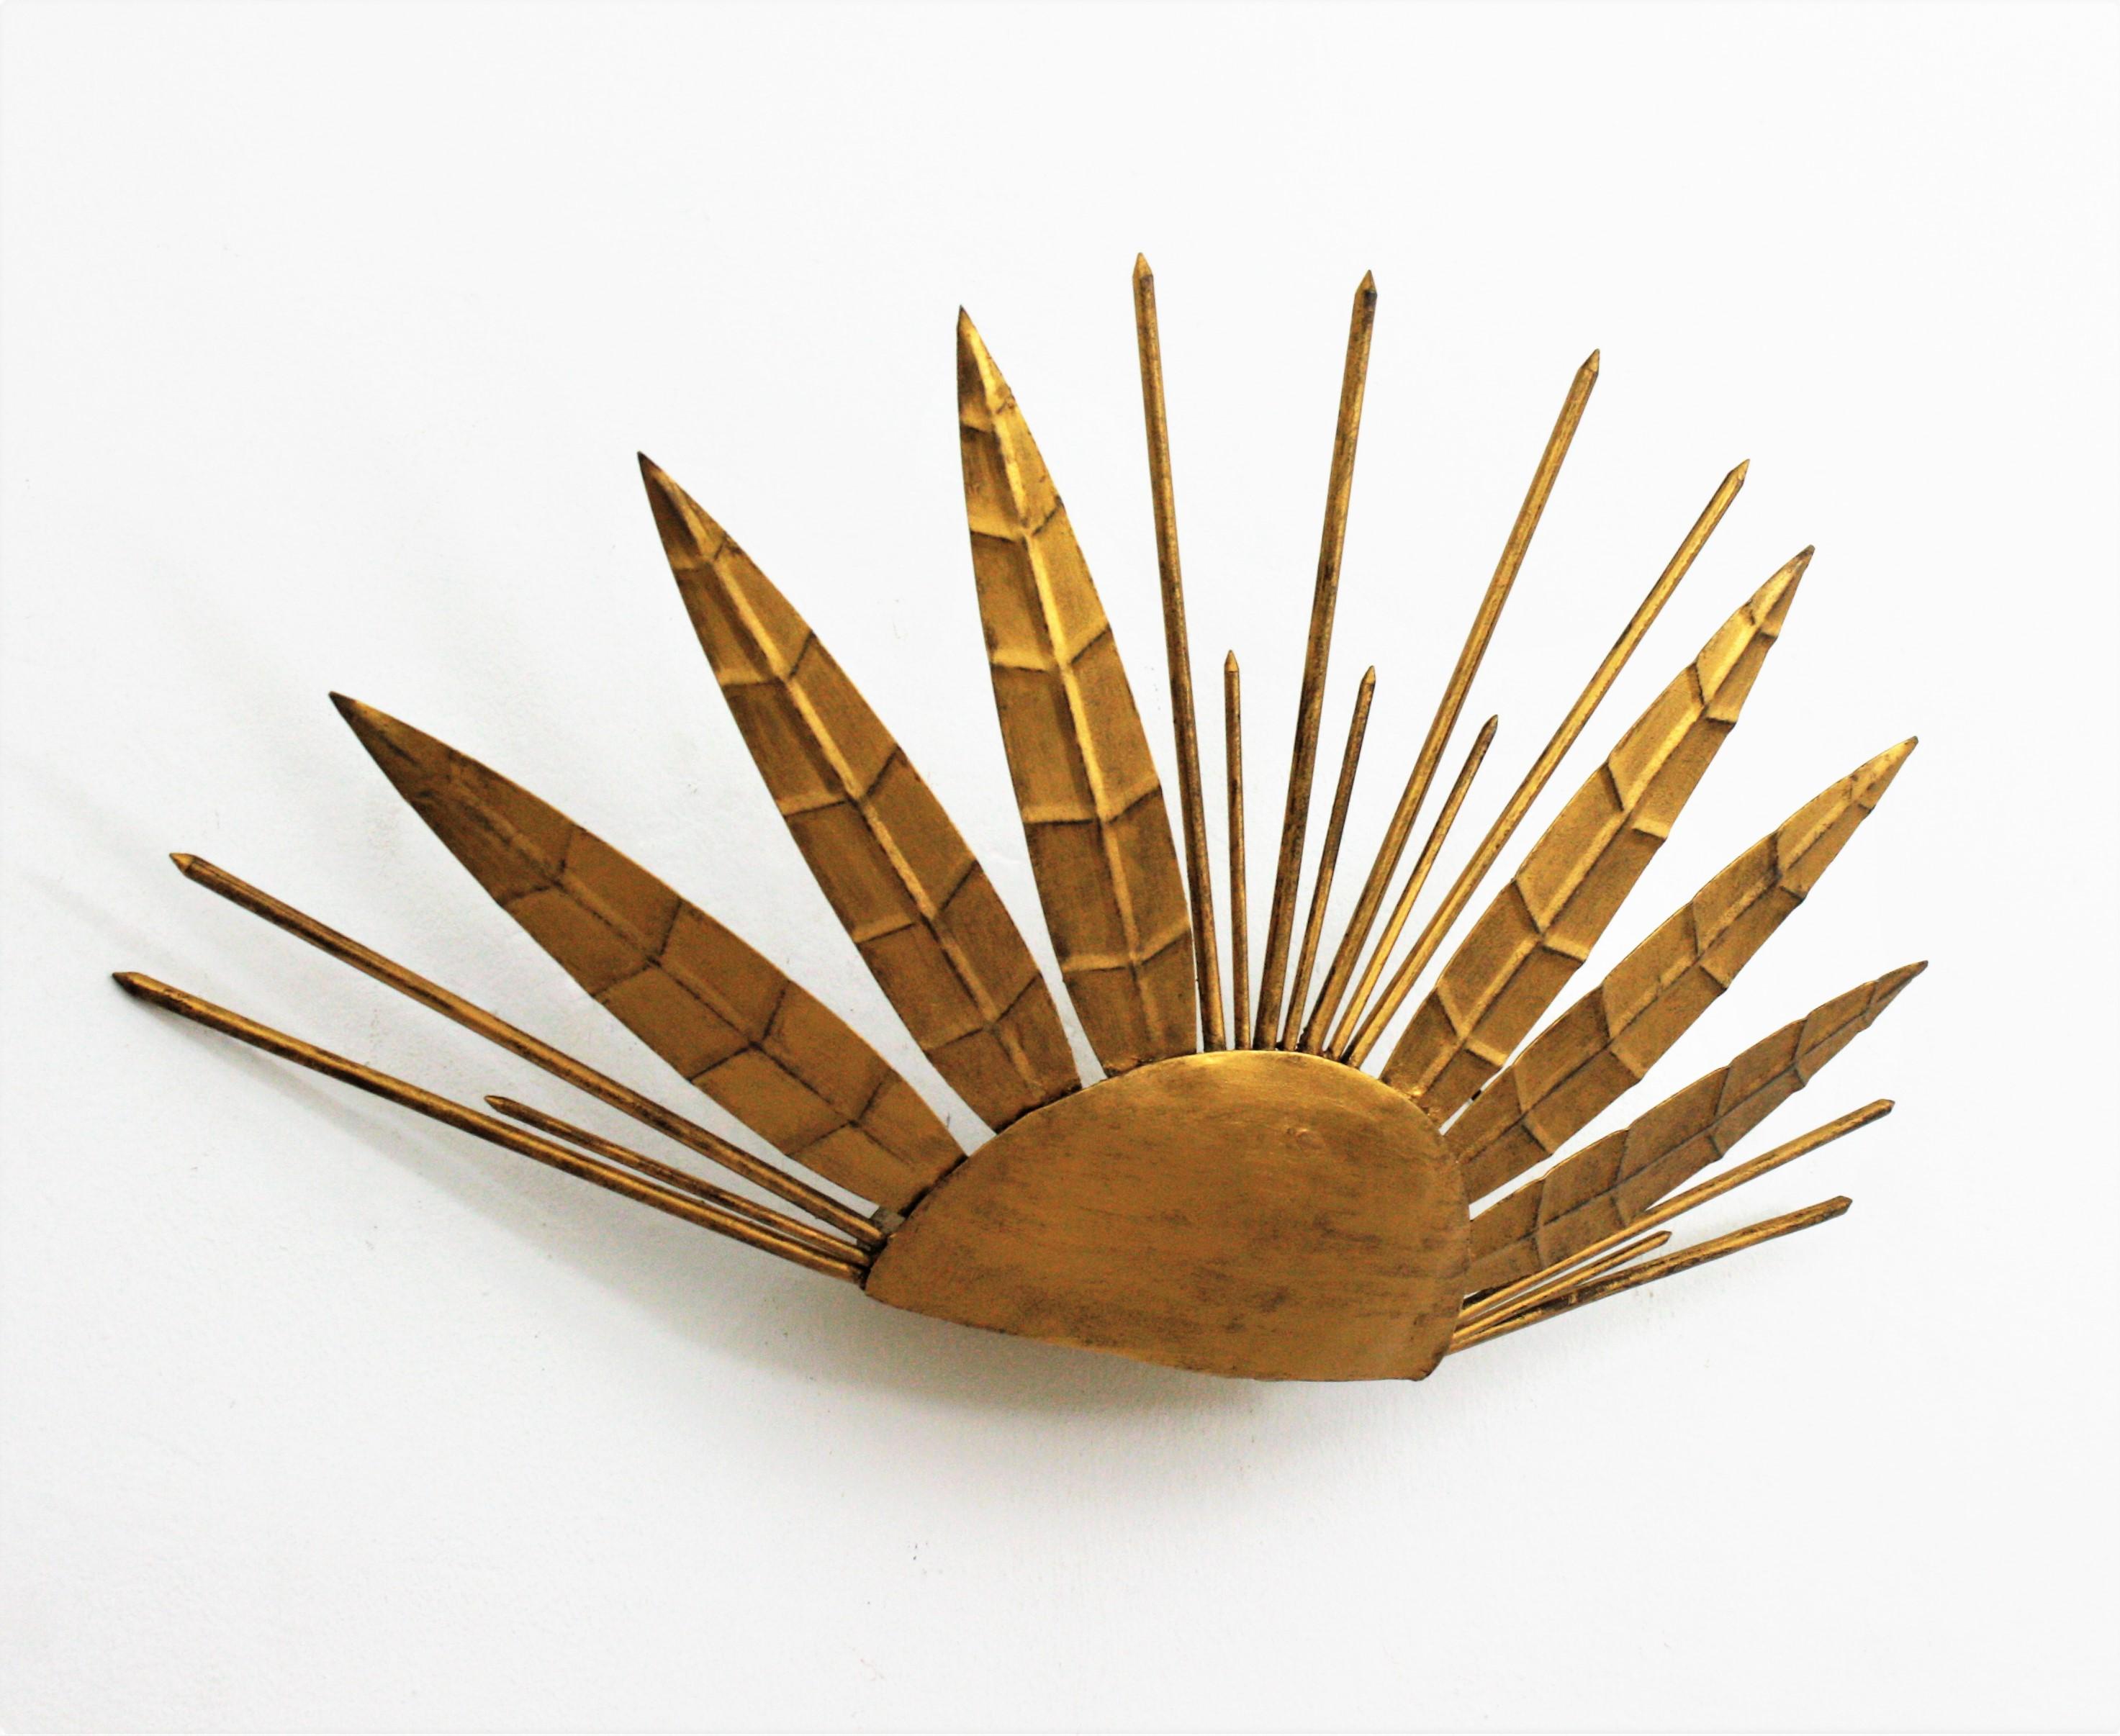 Unusual half sunburst shape wall sconce with leaf and nail accents from the late Art Deco period, France, 1940s-1950s.
This raising sun sunburst light is highly decorative due to its design with alternating iron leaves with pointed spikes.
It has